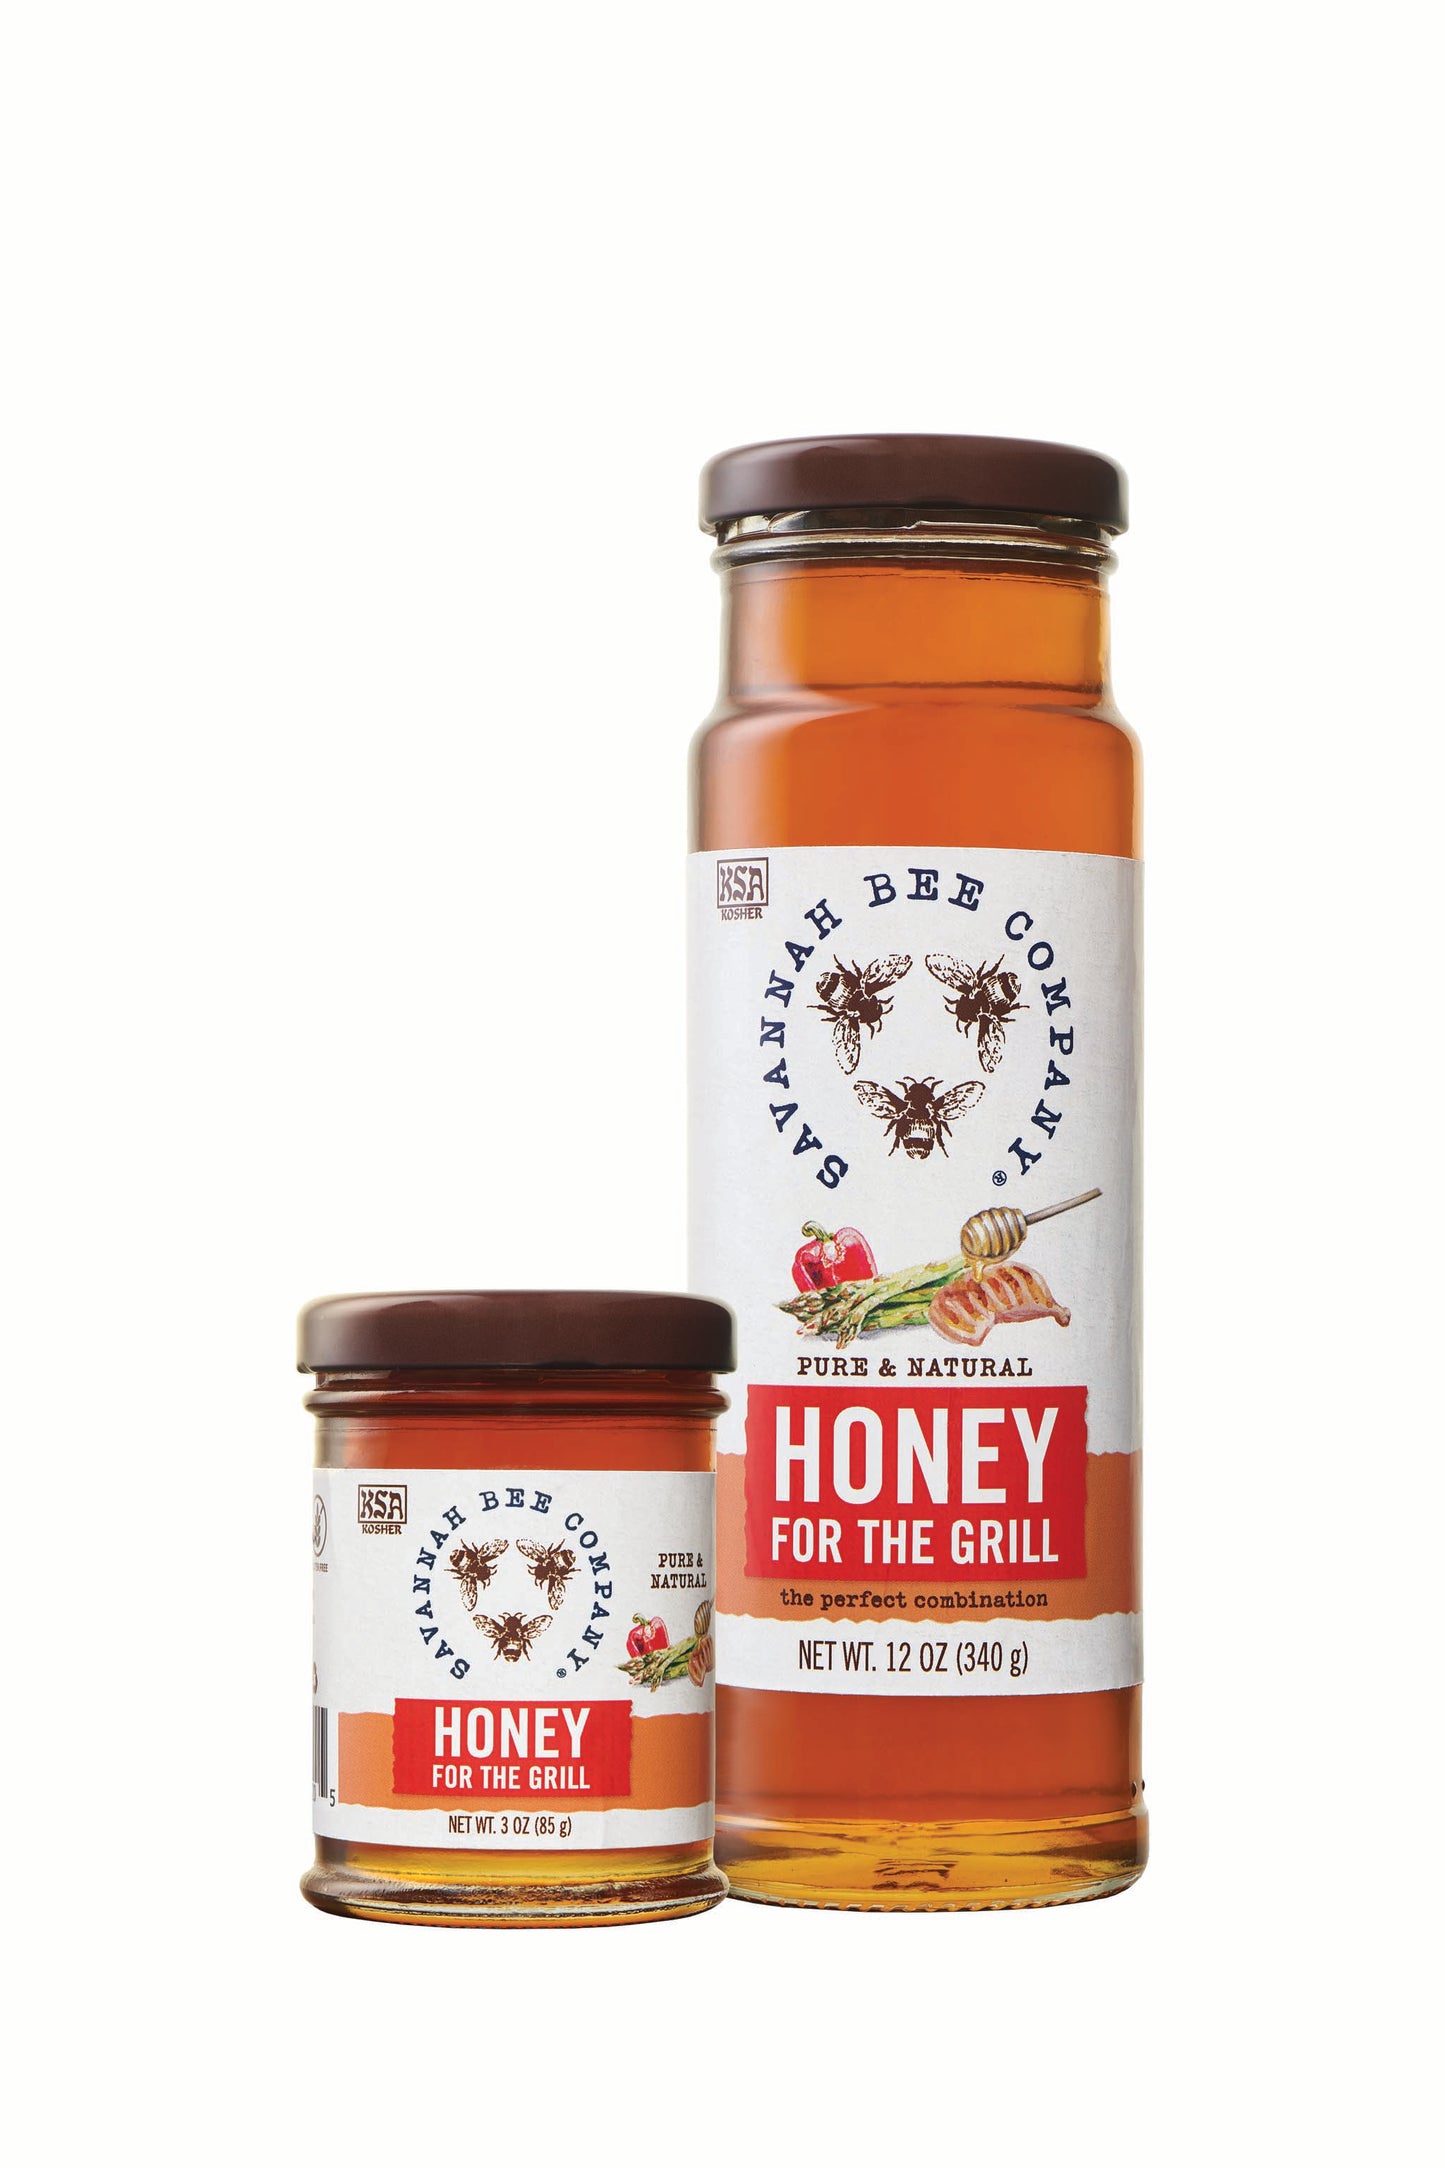 Pure & Natural Honey for the grill 3 oz. mini and 12 oz. tower studio image